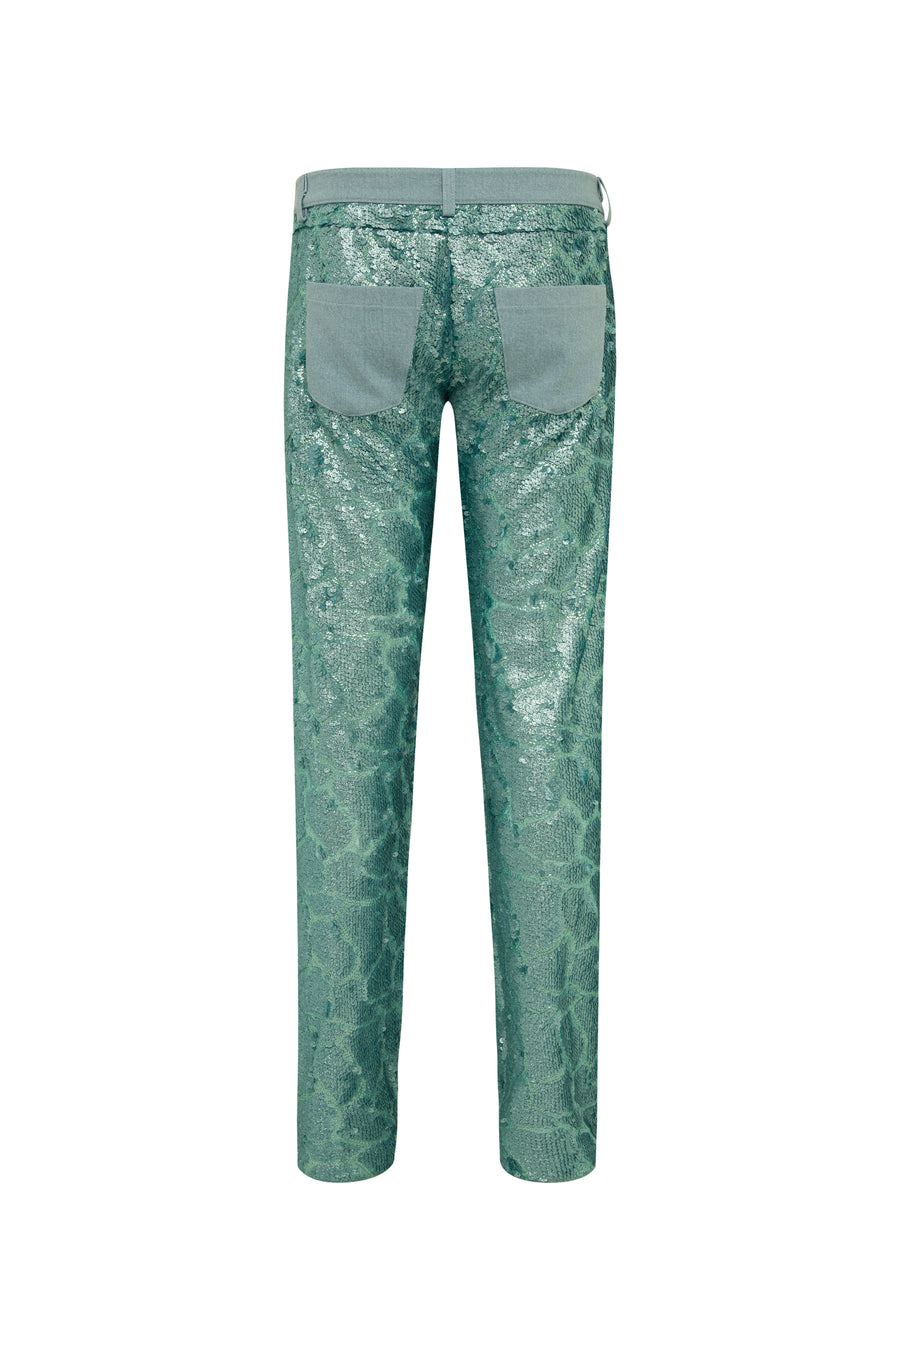 SUN - Sequined low-rise pants